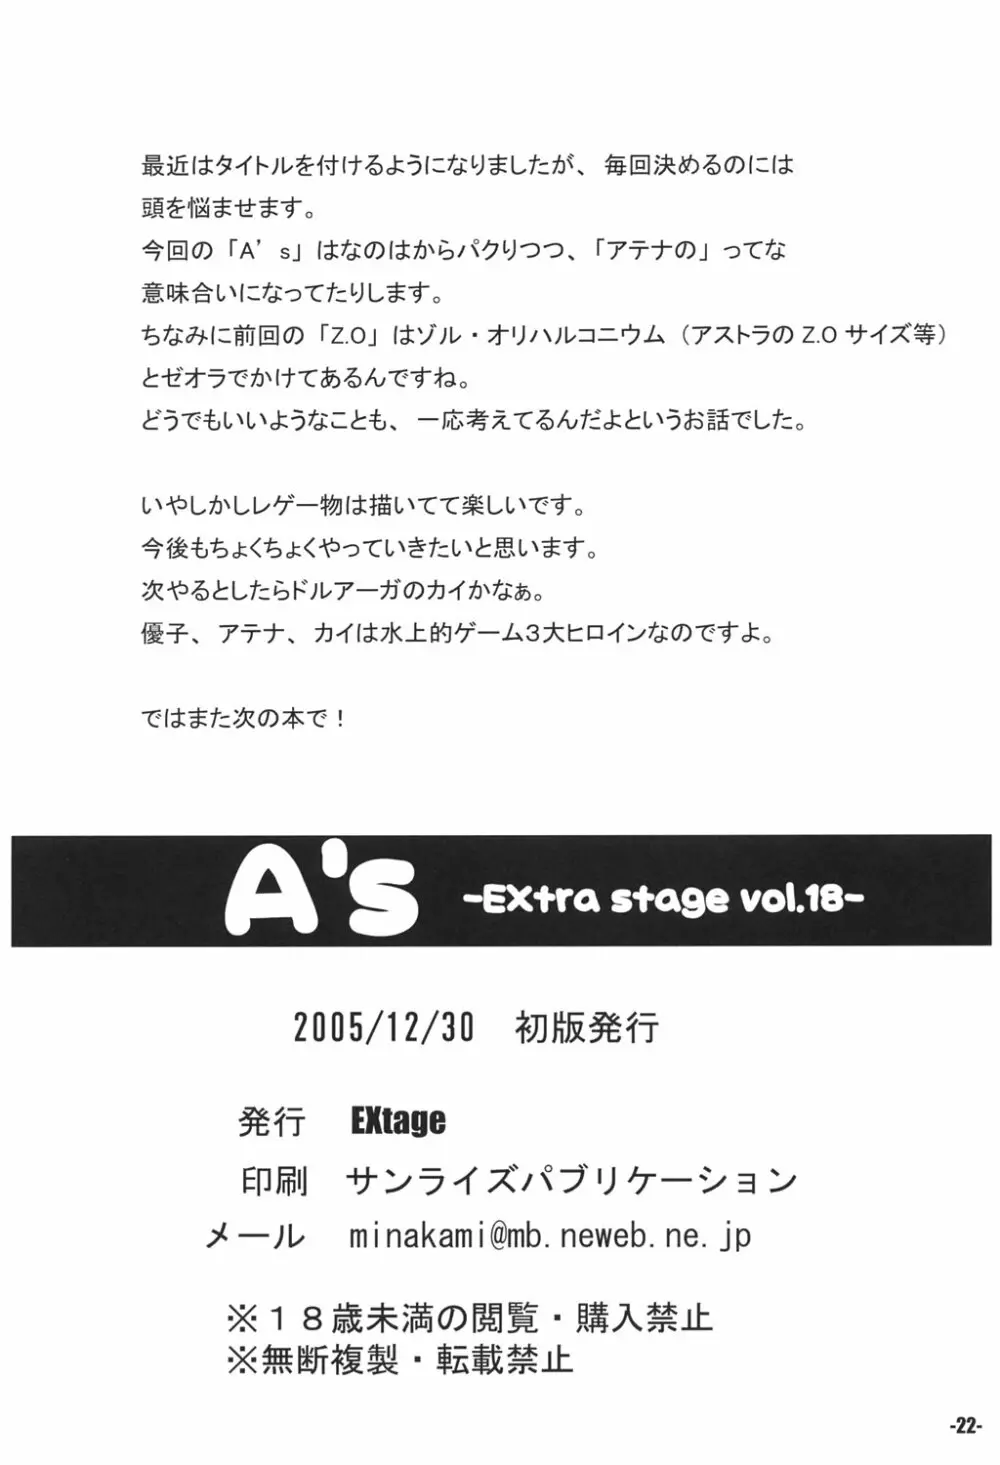 A’s Extra stage vol.18 21ページ